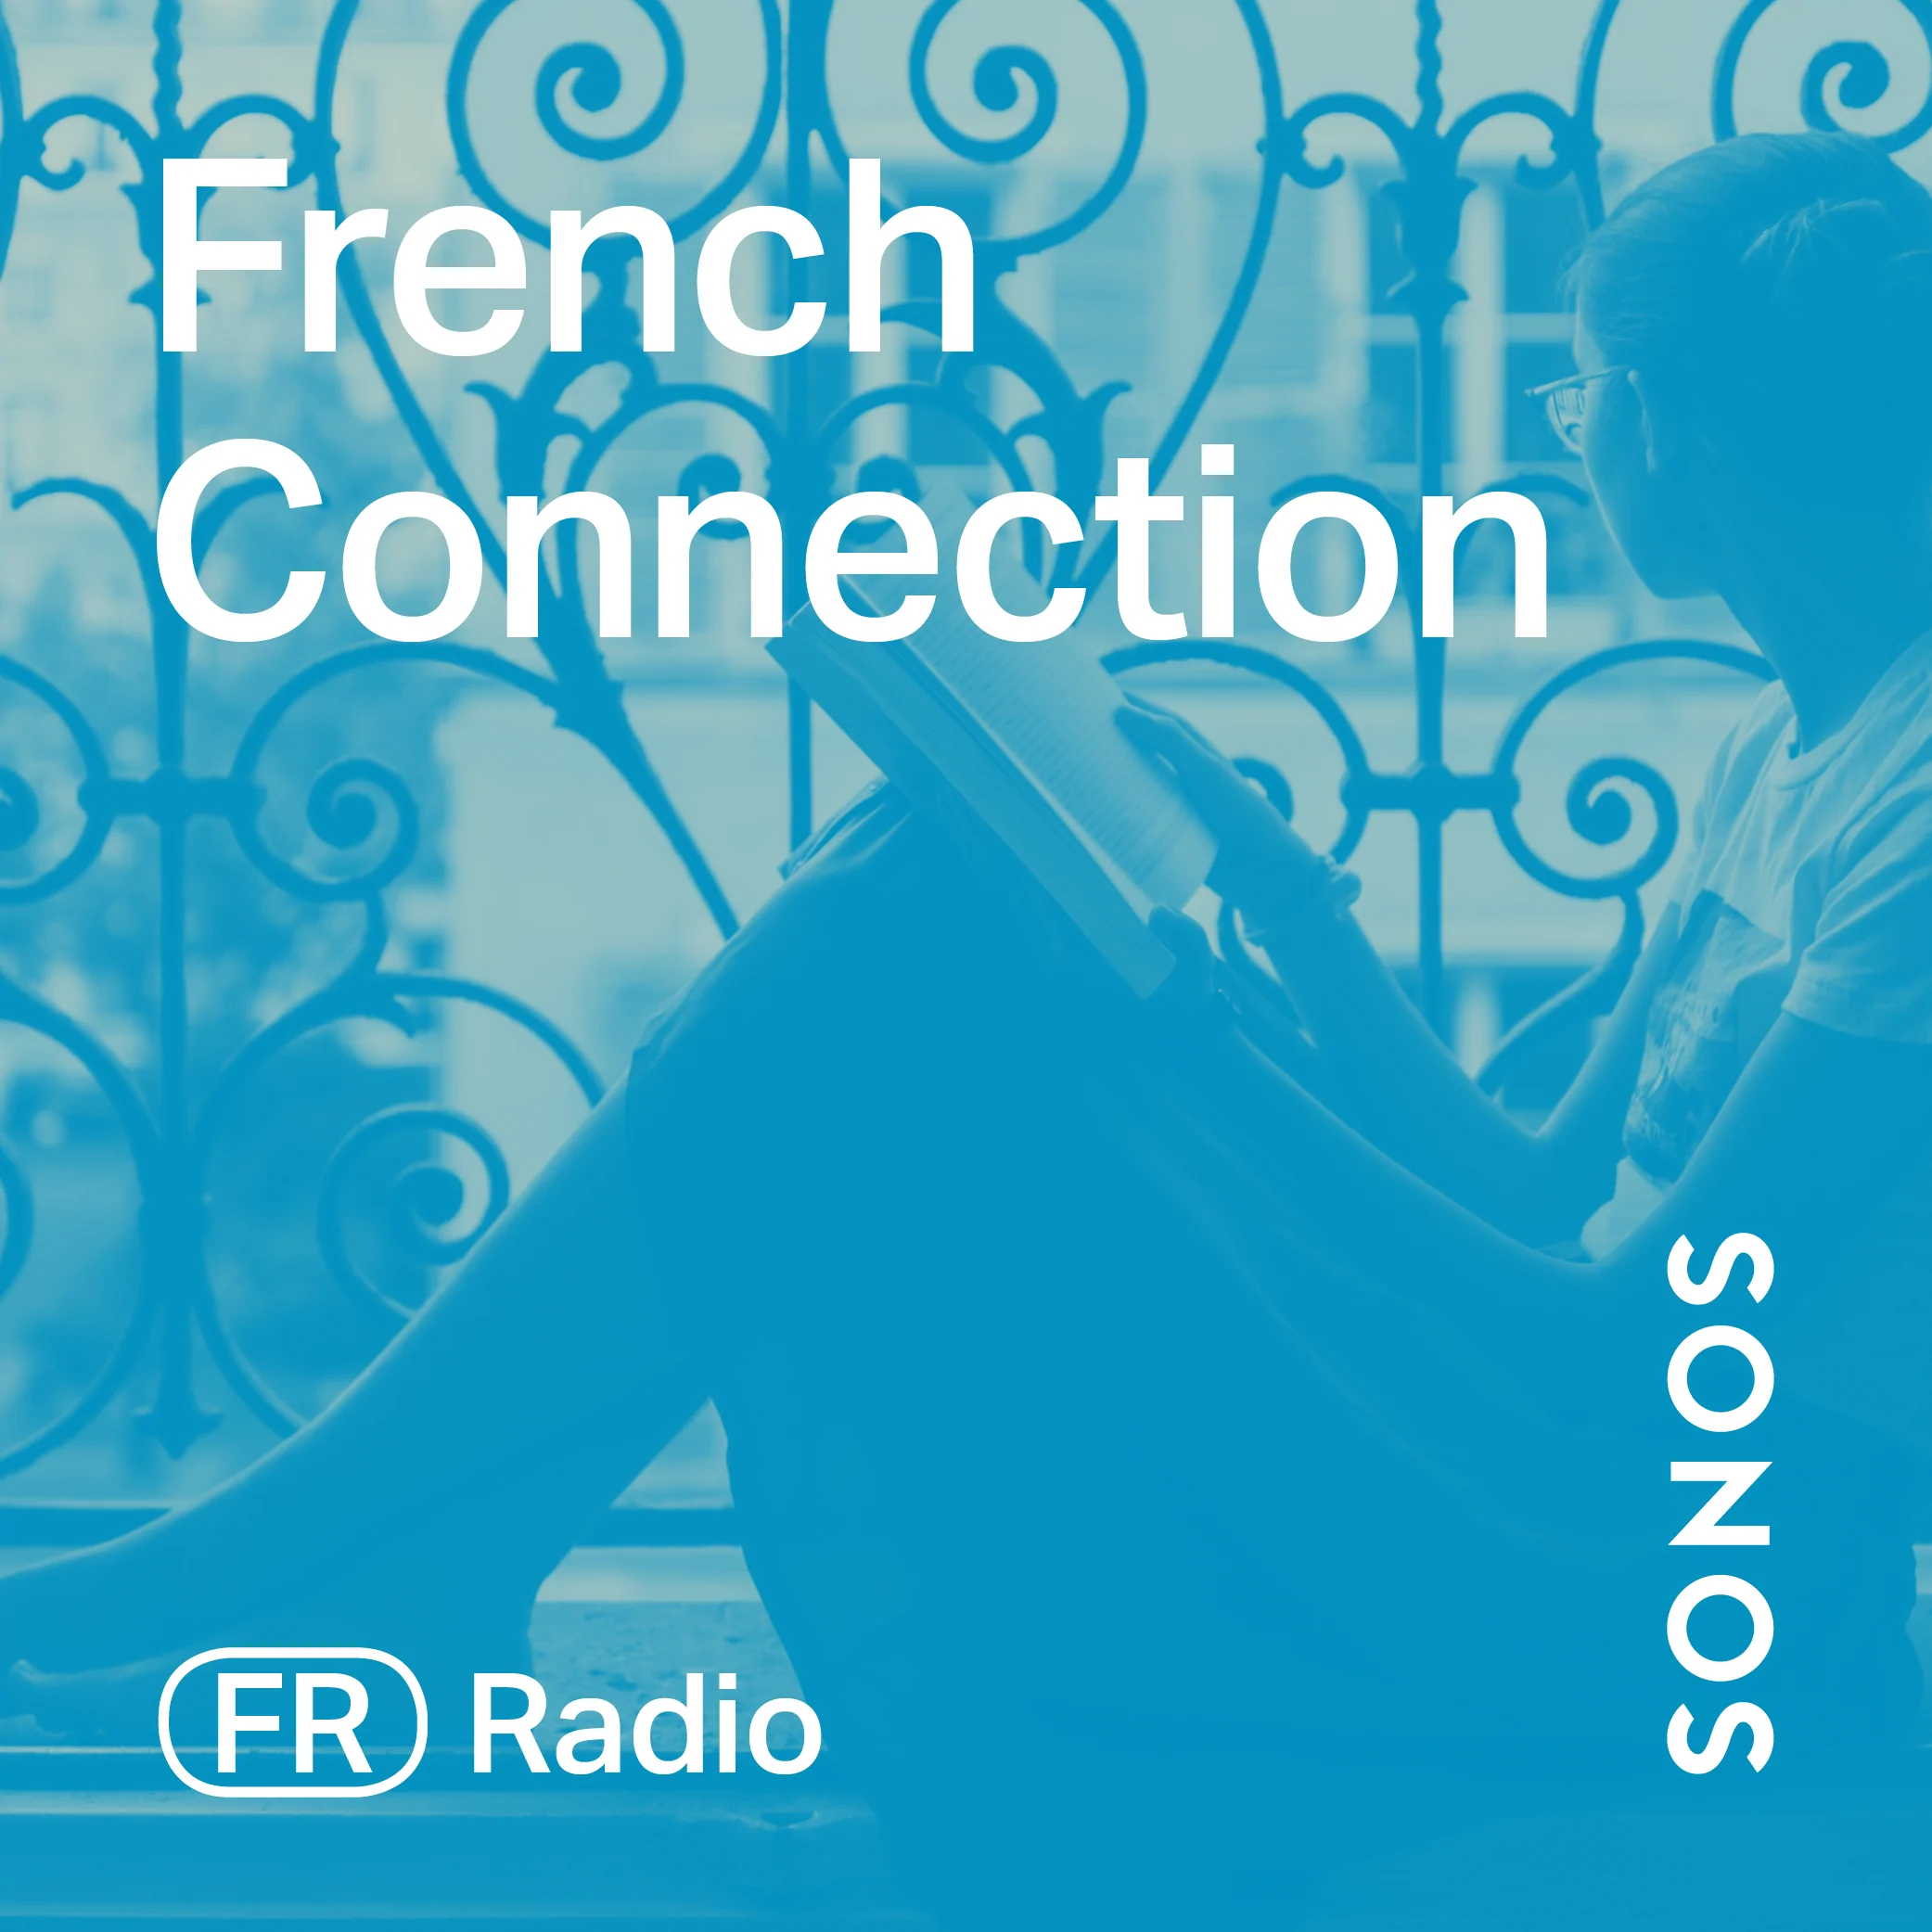 French Connection Spotify Playlist